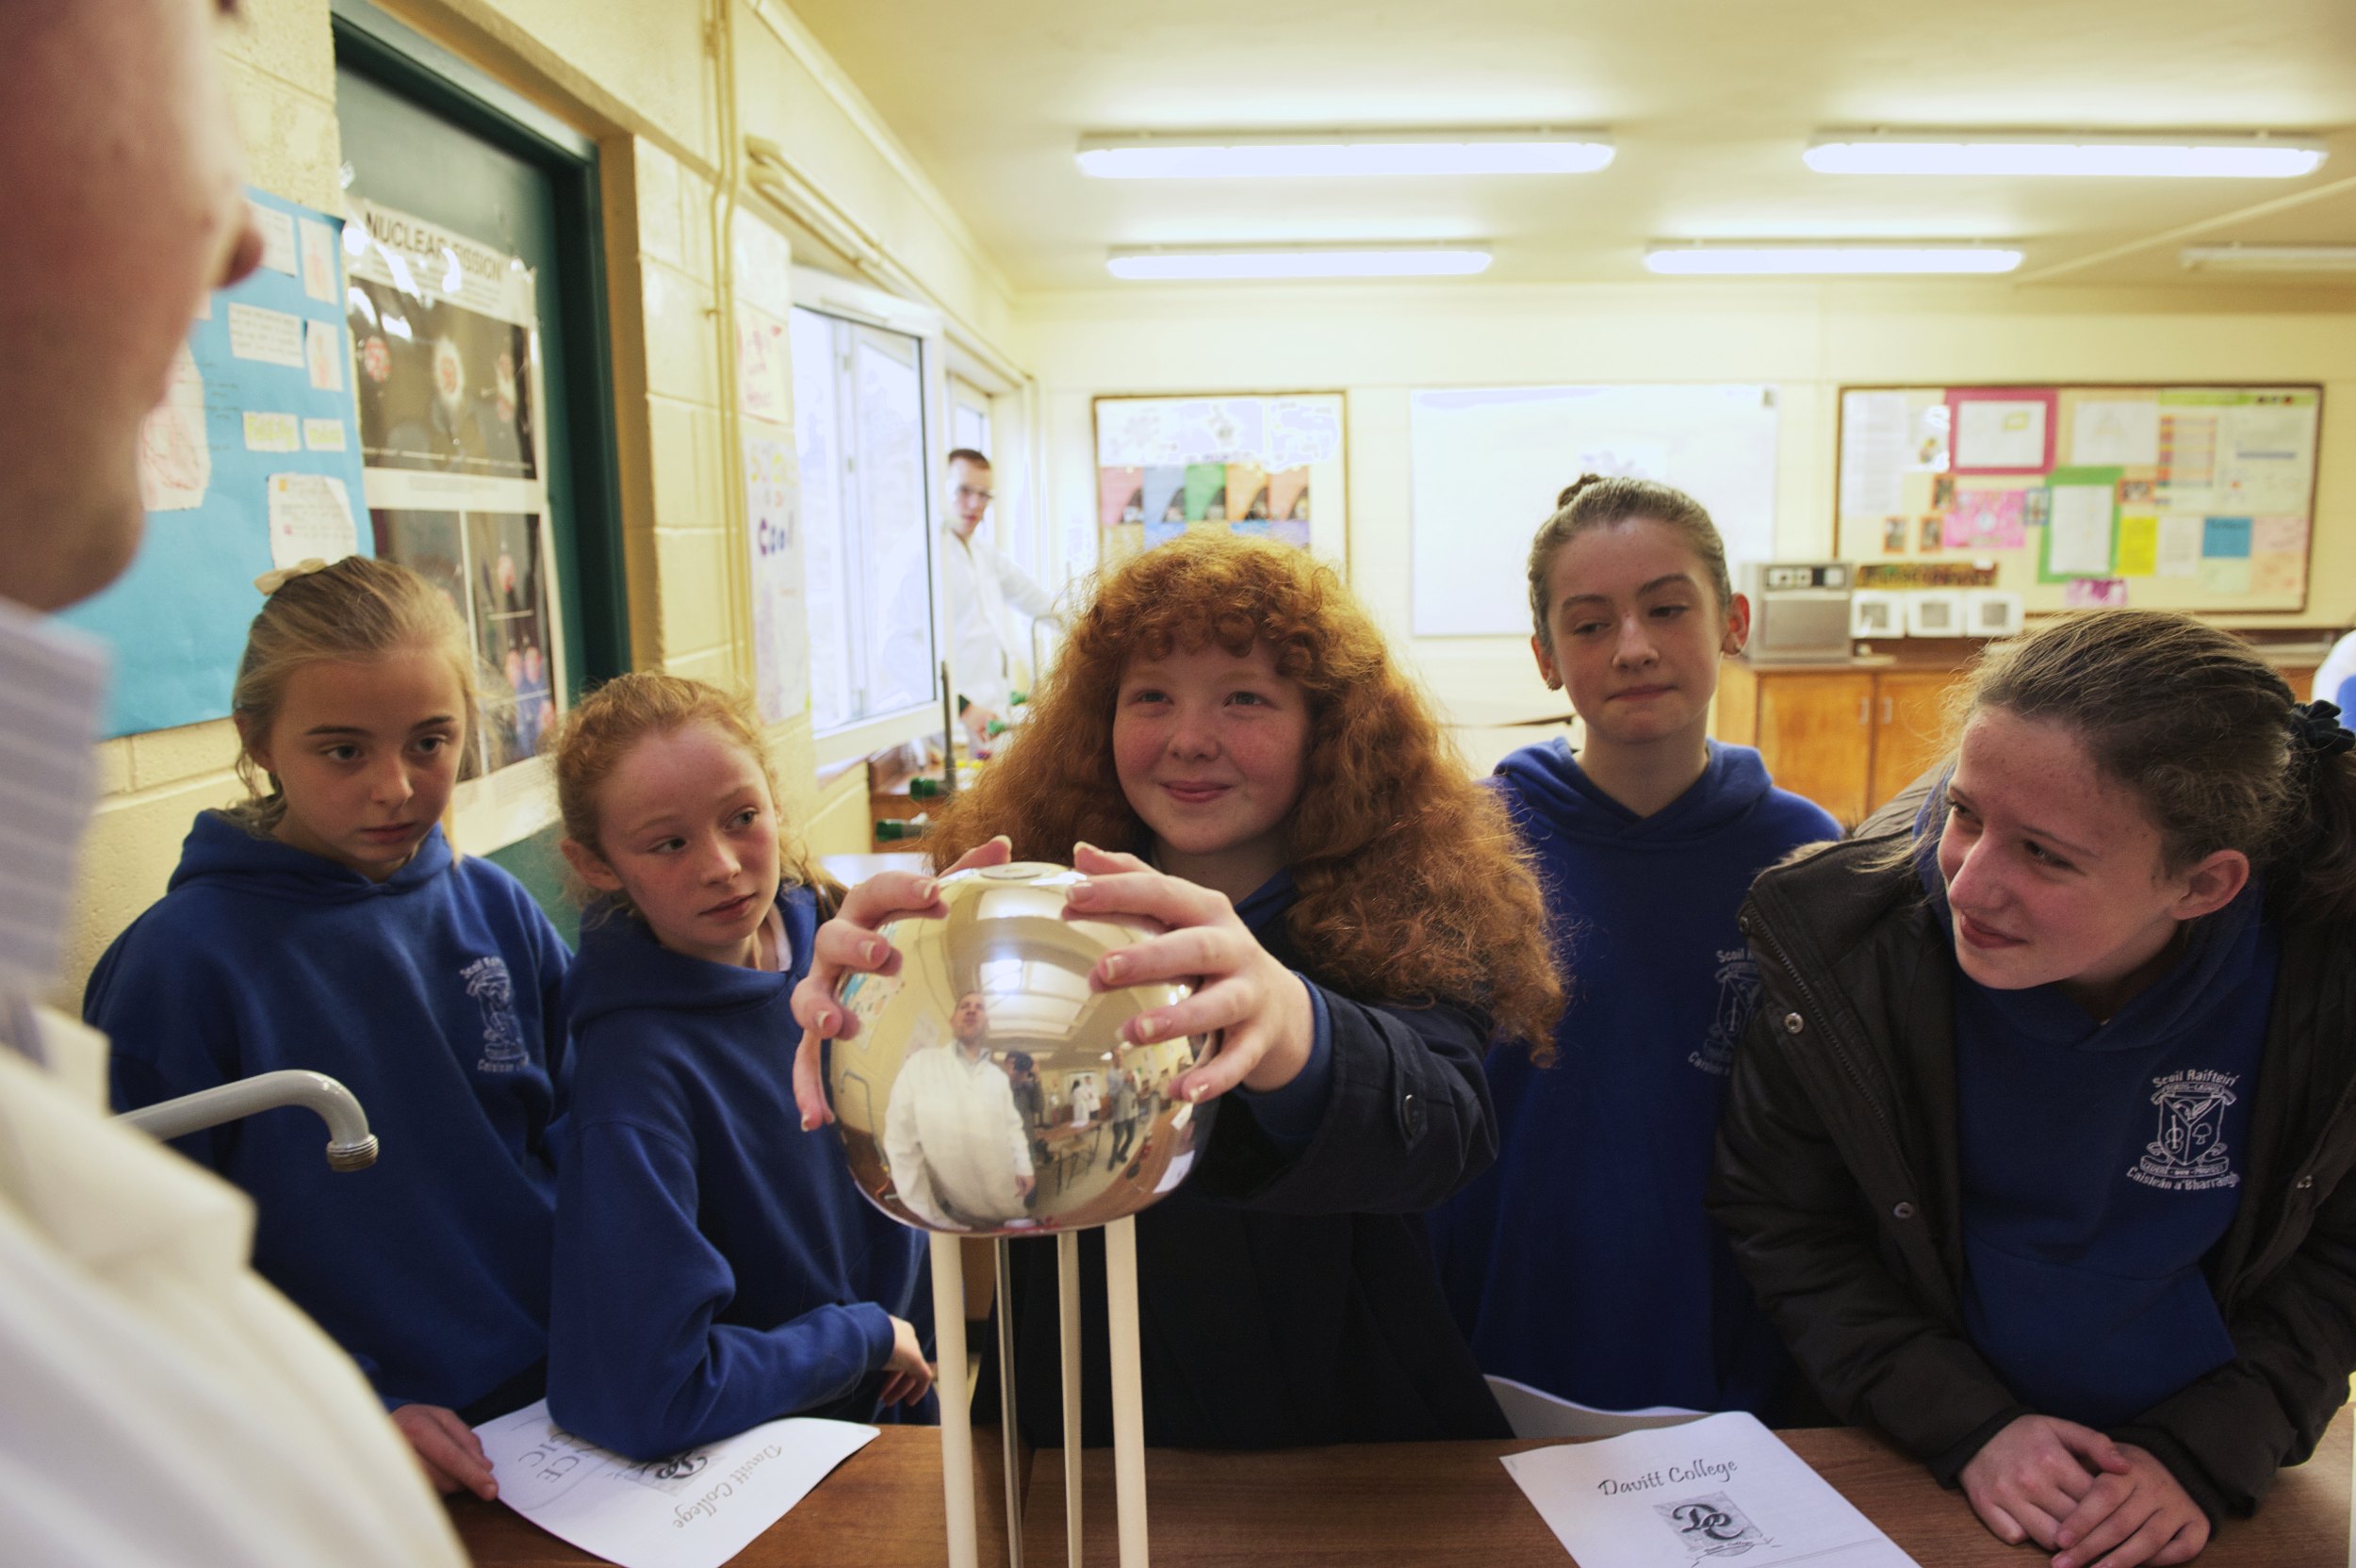 Students from Scoil Raifteiri, Castlebar are intrigued as they are shown Static Electricity during Science Week at Davitt College, a three-day science event for sixth class students from national schools in Castlebar and surrounding districts